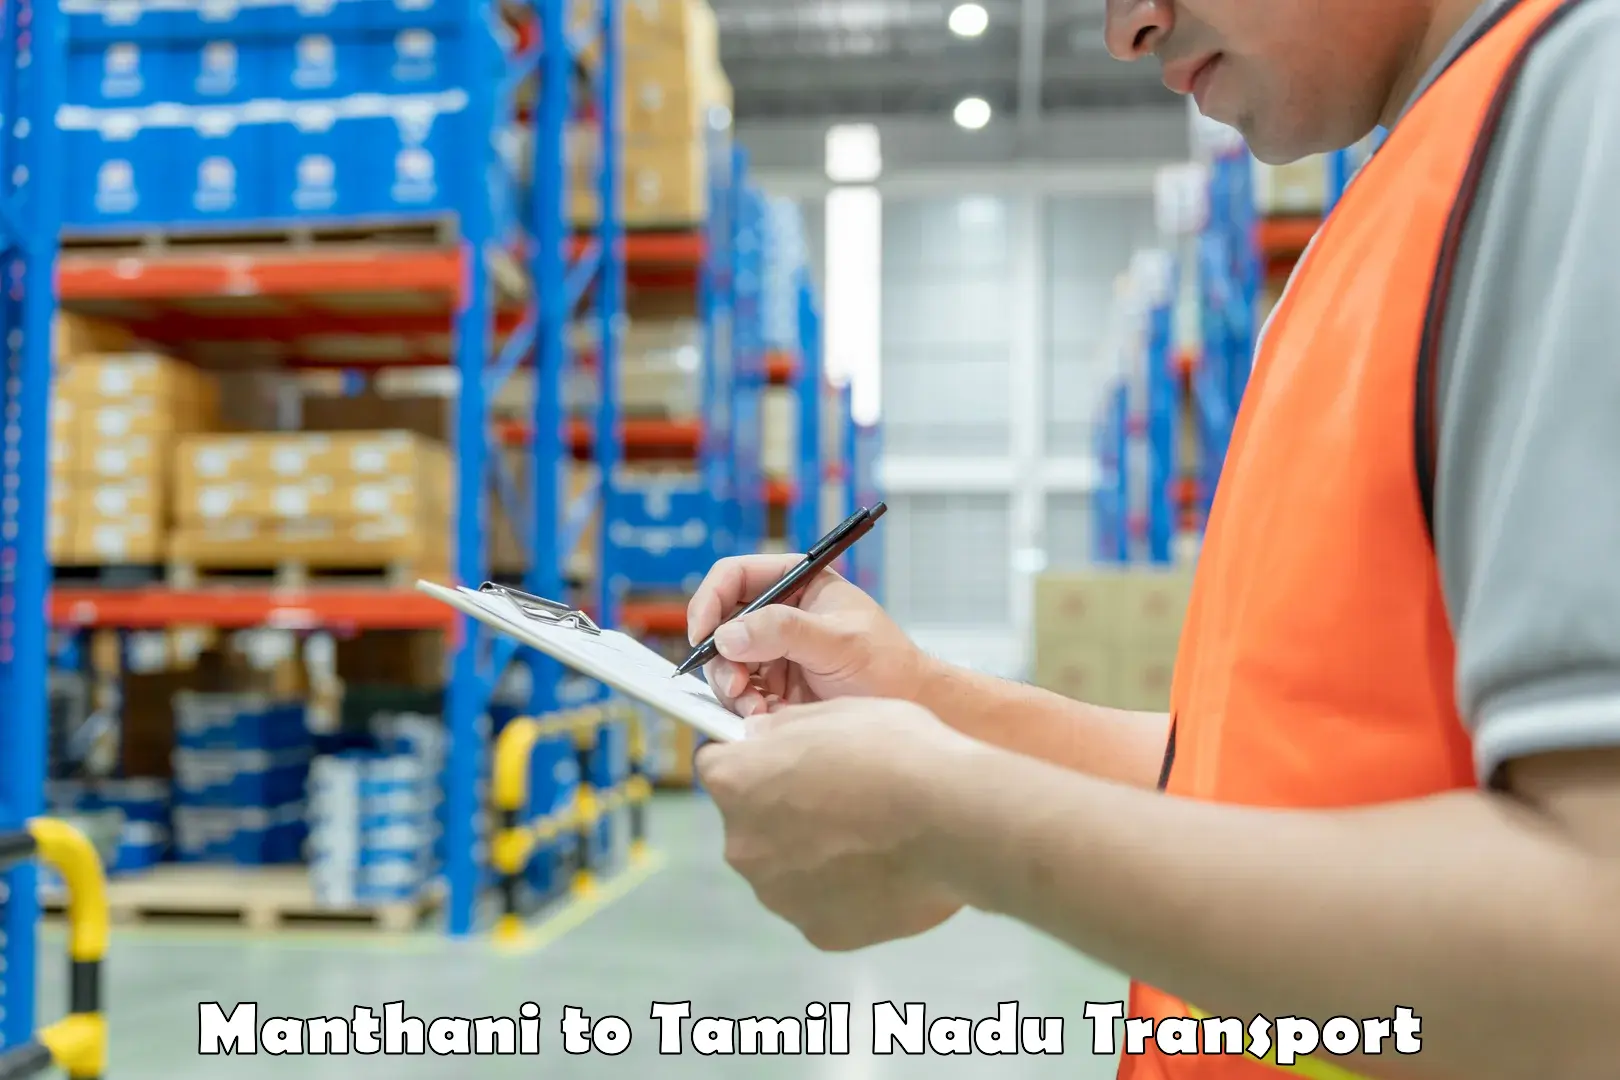 Domestic goods transportation services in Manthani to Chennai Port